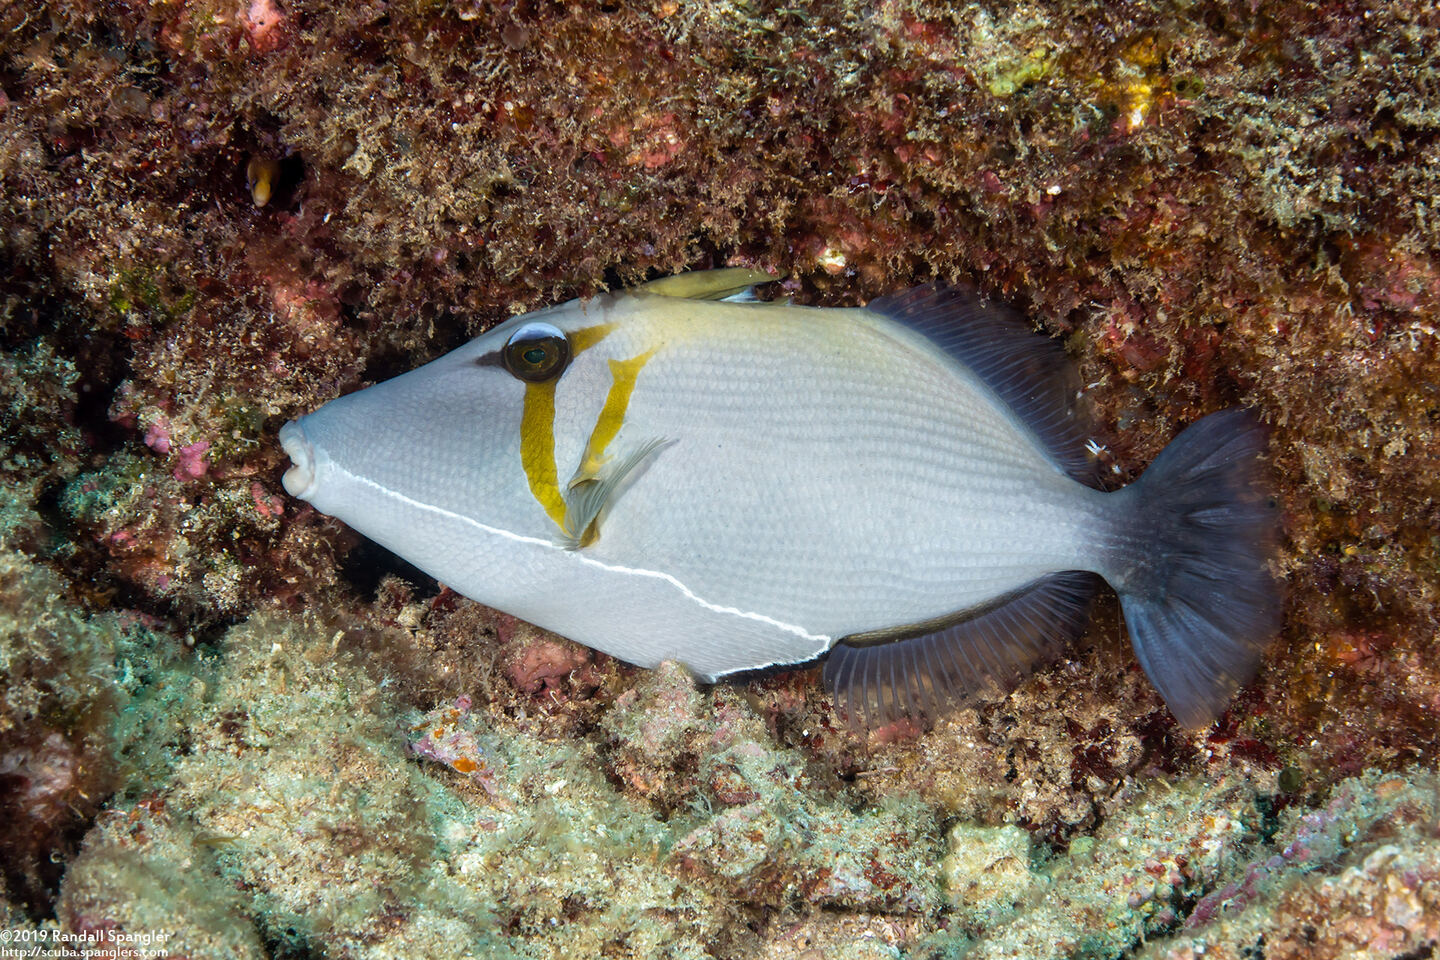 Sufflamen bursa (Scythe Triggerfish); Using its trigger-like fin to wedge itself into a crevice